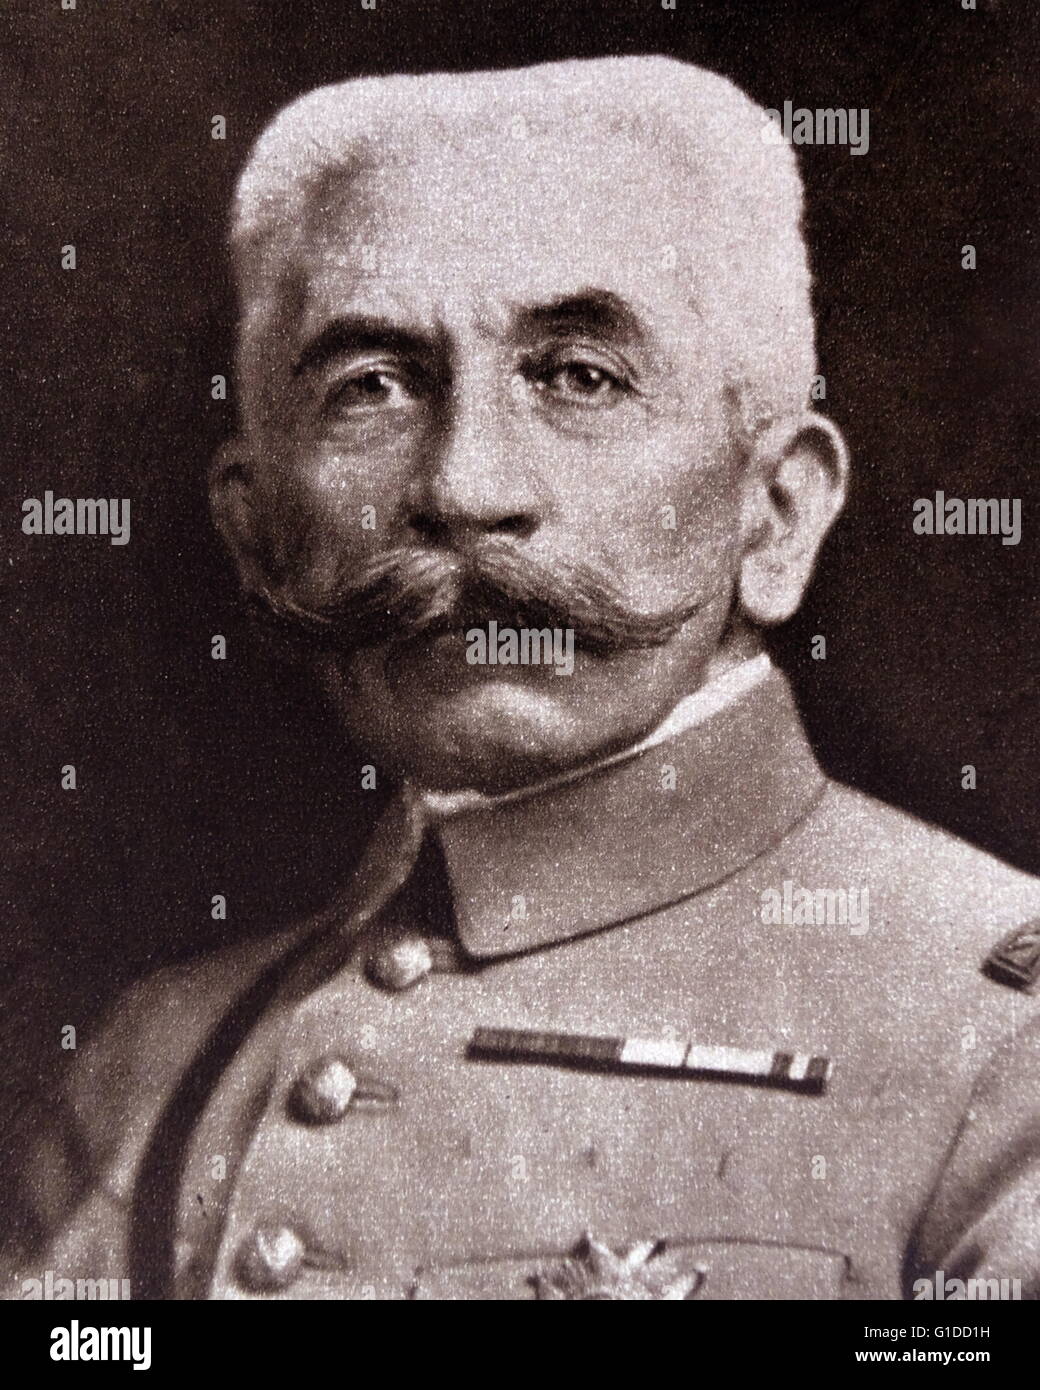 Louis Lyautey (17 November 1854 – 21 July 1934) was a French Army general and colonial administrator. After serving in Indochina and Madagascar, he became the first French Resident-General in Morocco from 1912 to 1925. Stock Photo